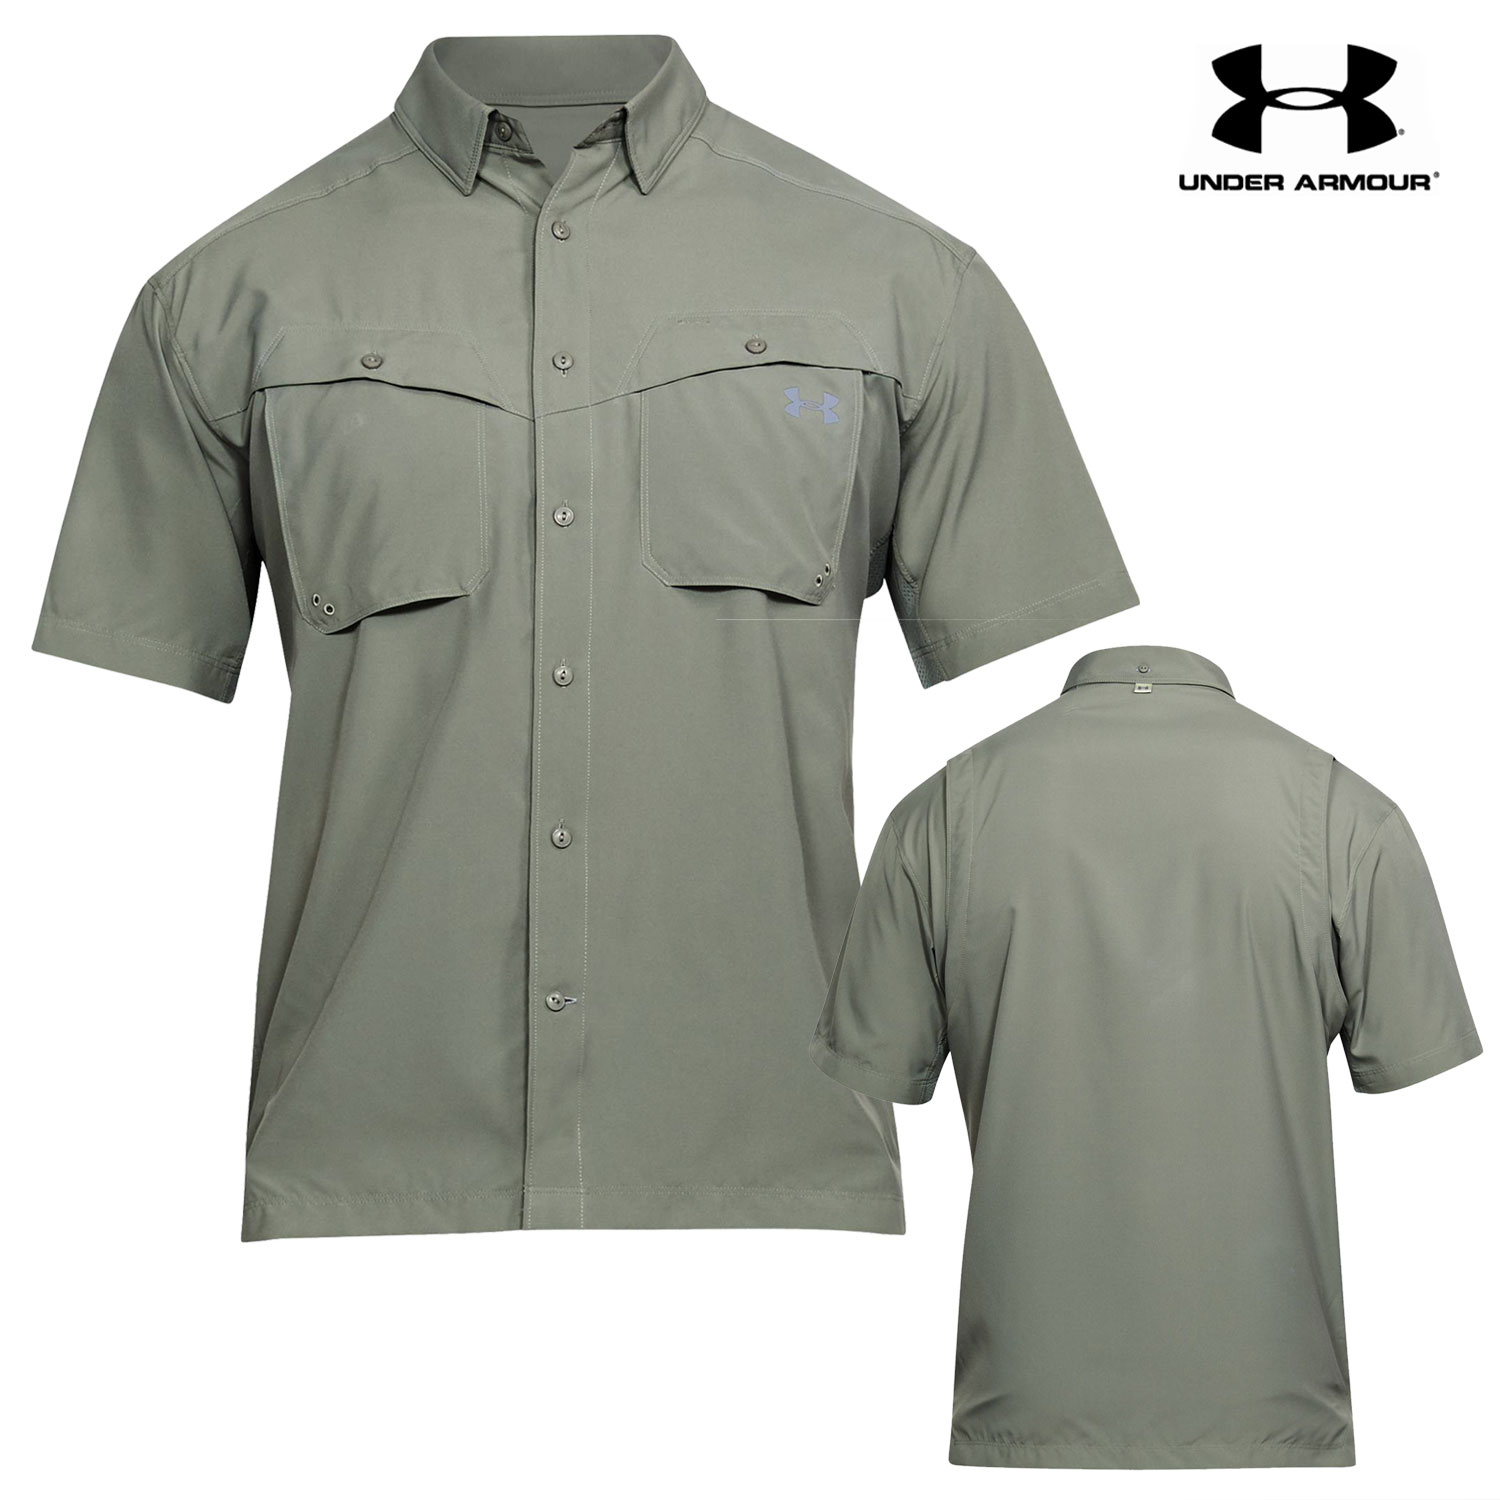 Under Armour Tide Chaser S/S Fishing Shirt (S)- Moss Green